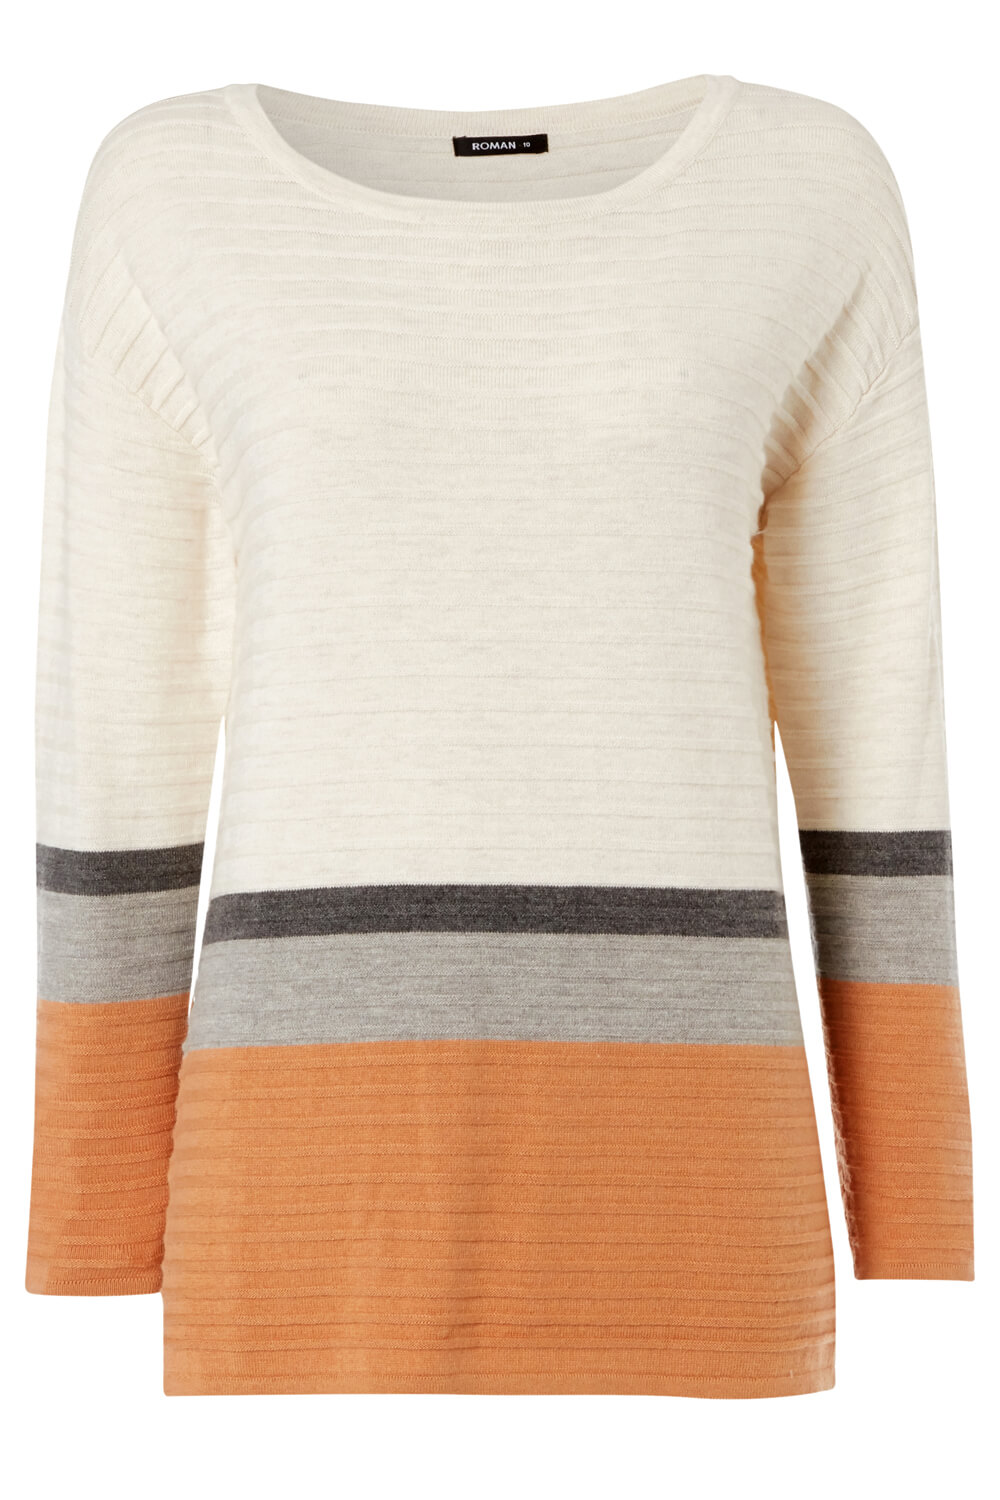 Rust Colour Block Ribbed Jumper, Image 5 of 5